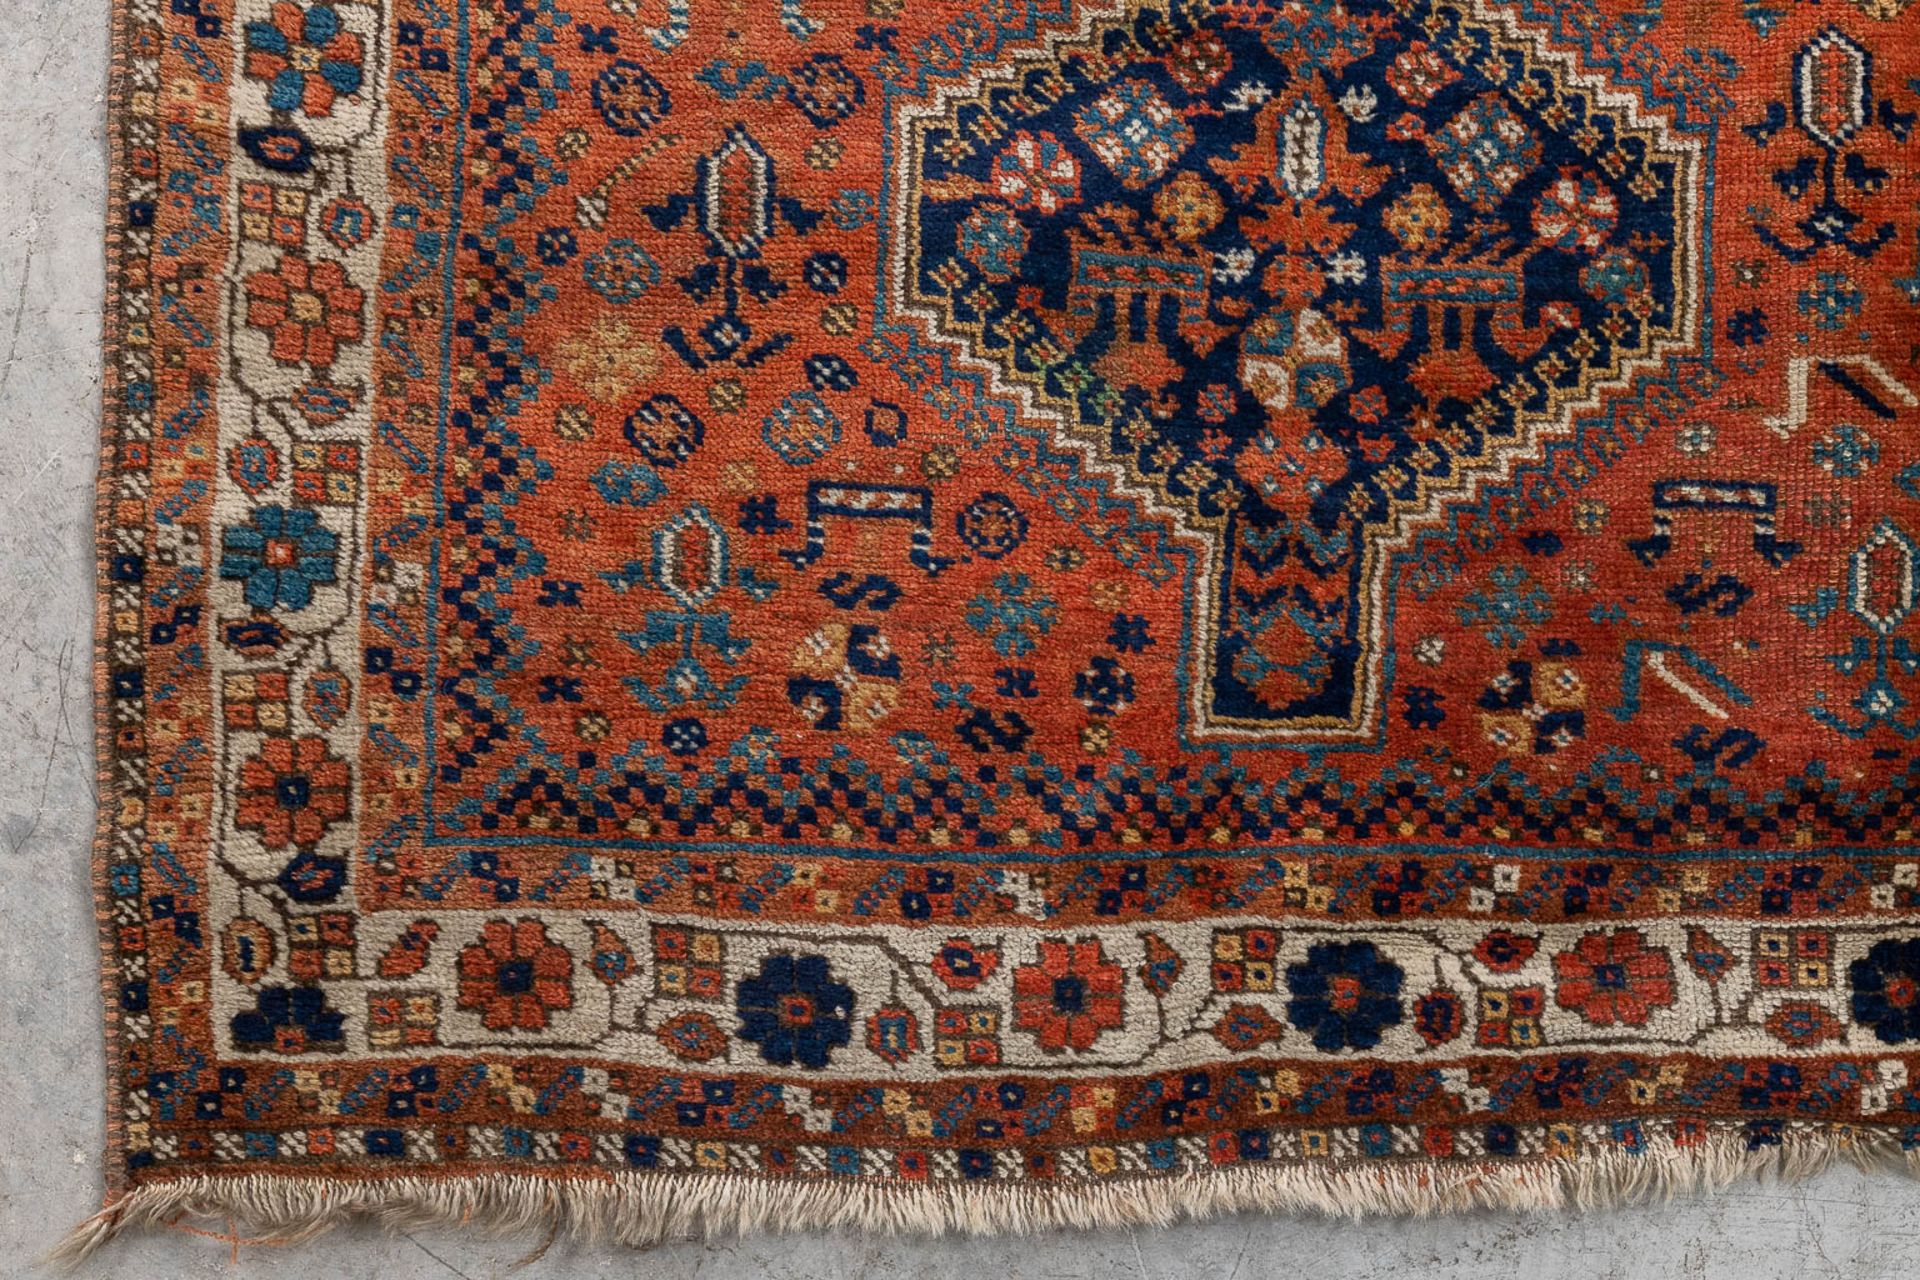 A collection of 3 Oriental hand-made carpets, probably Caucasian. (L: 157 x W: 116 cm) - Image 4 of 11